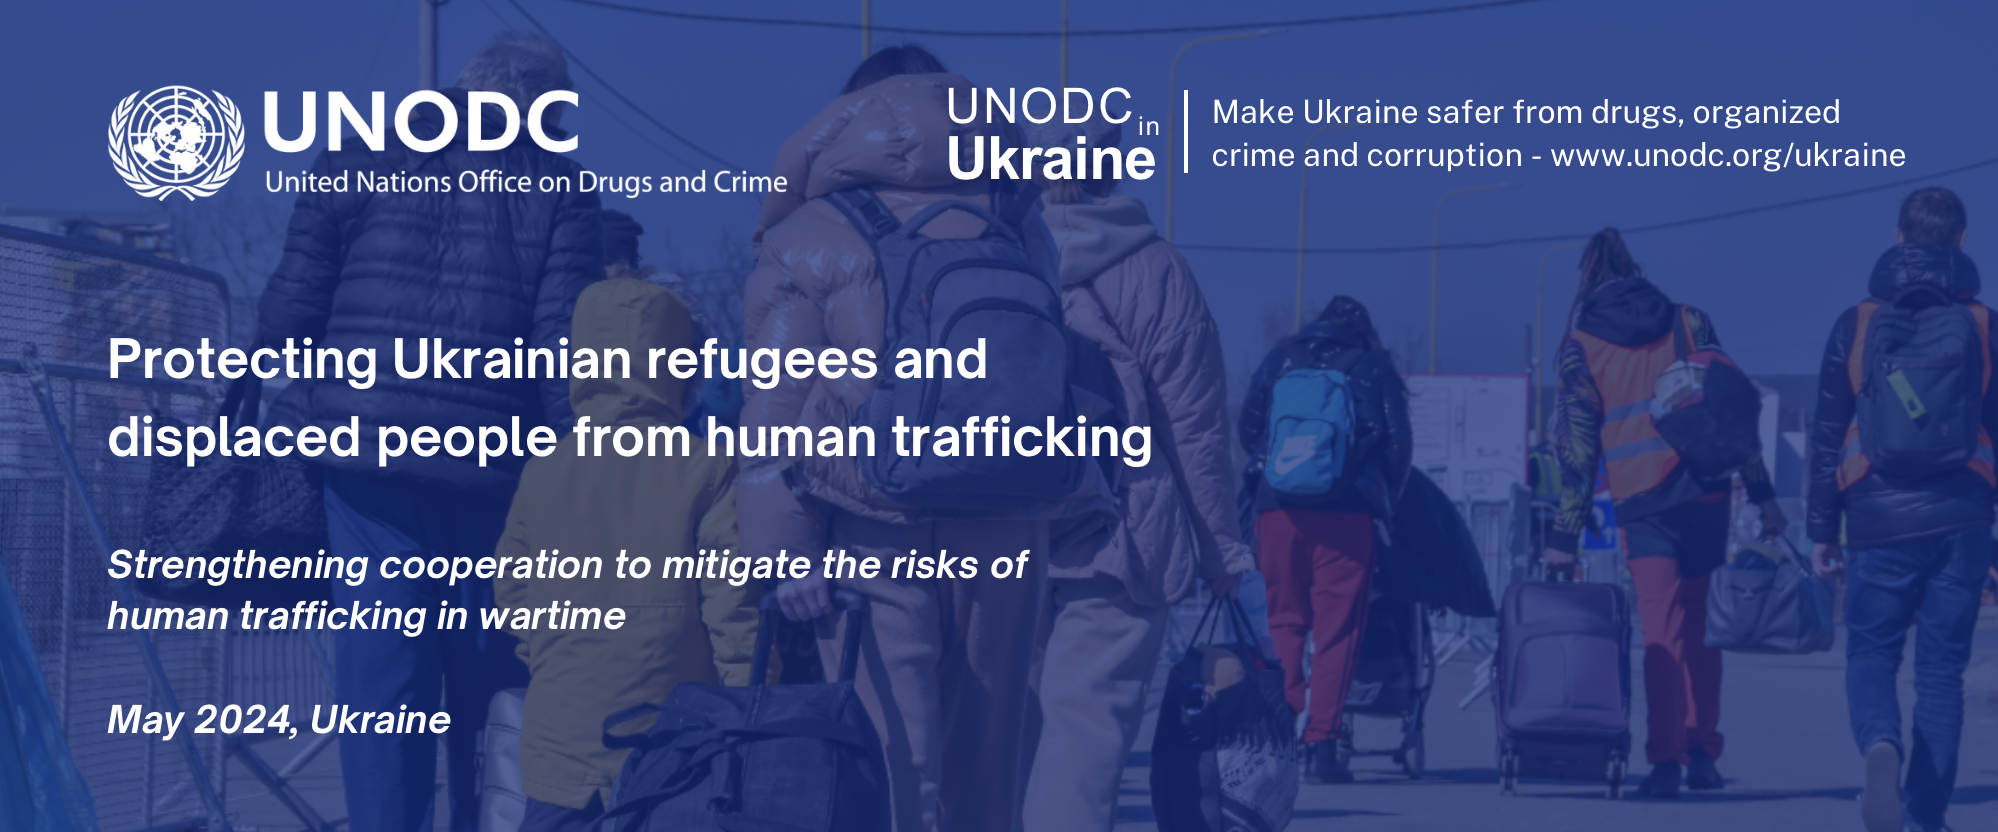 Protecting Ukrainian refugees and  displaced people from human trafficking - Strengthening cooperation to mitigate the risks of human trafficking in wartime 